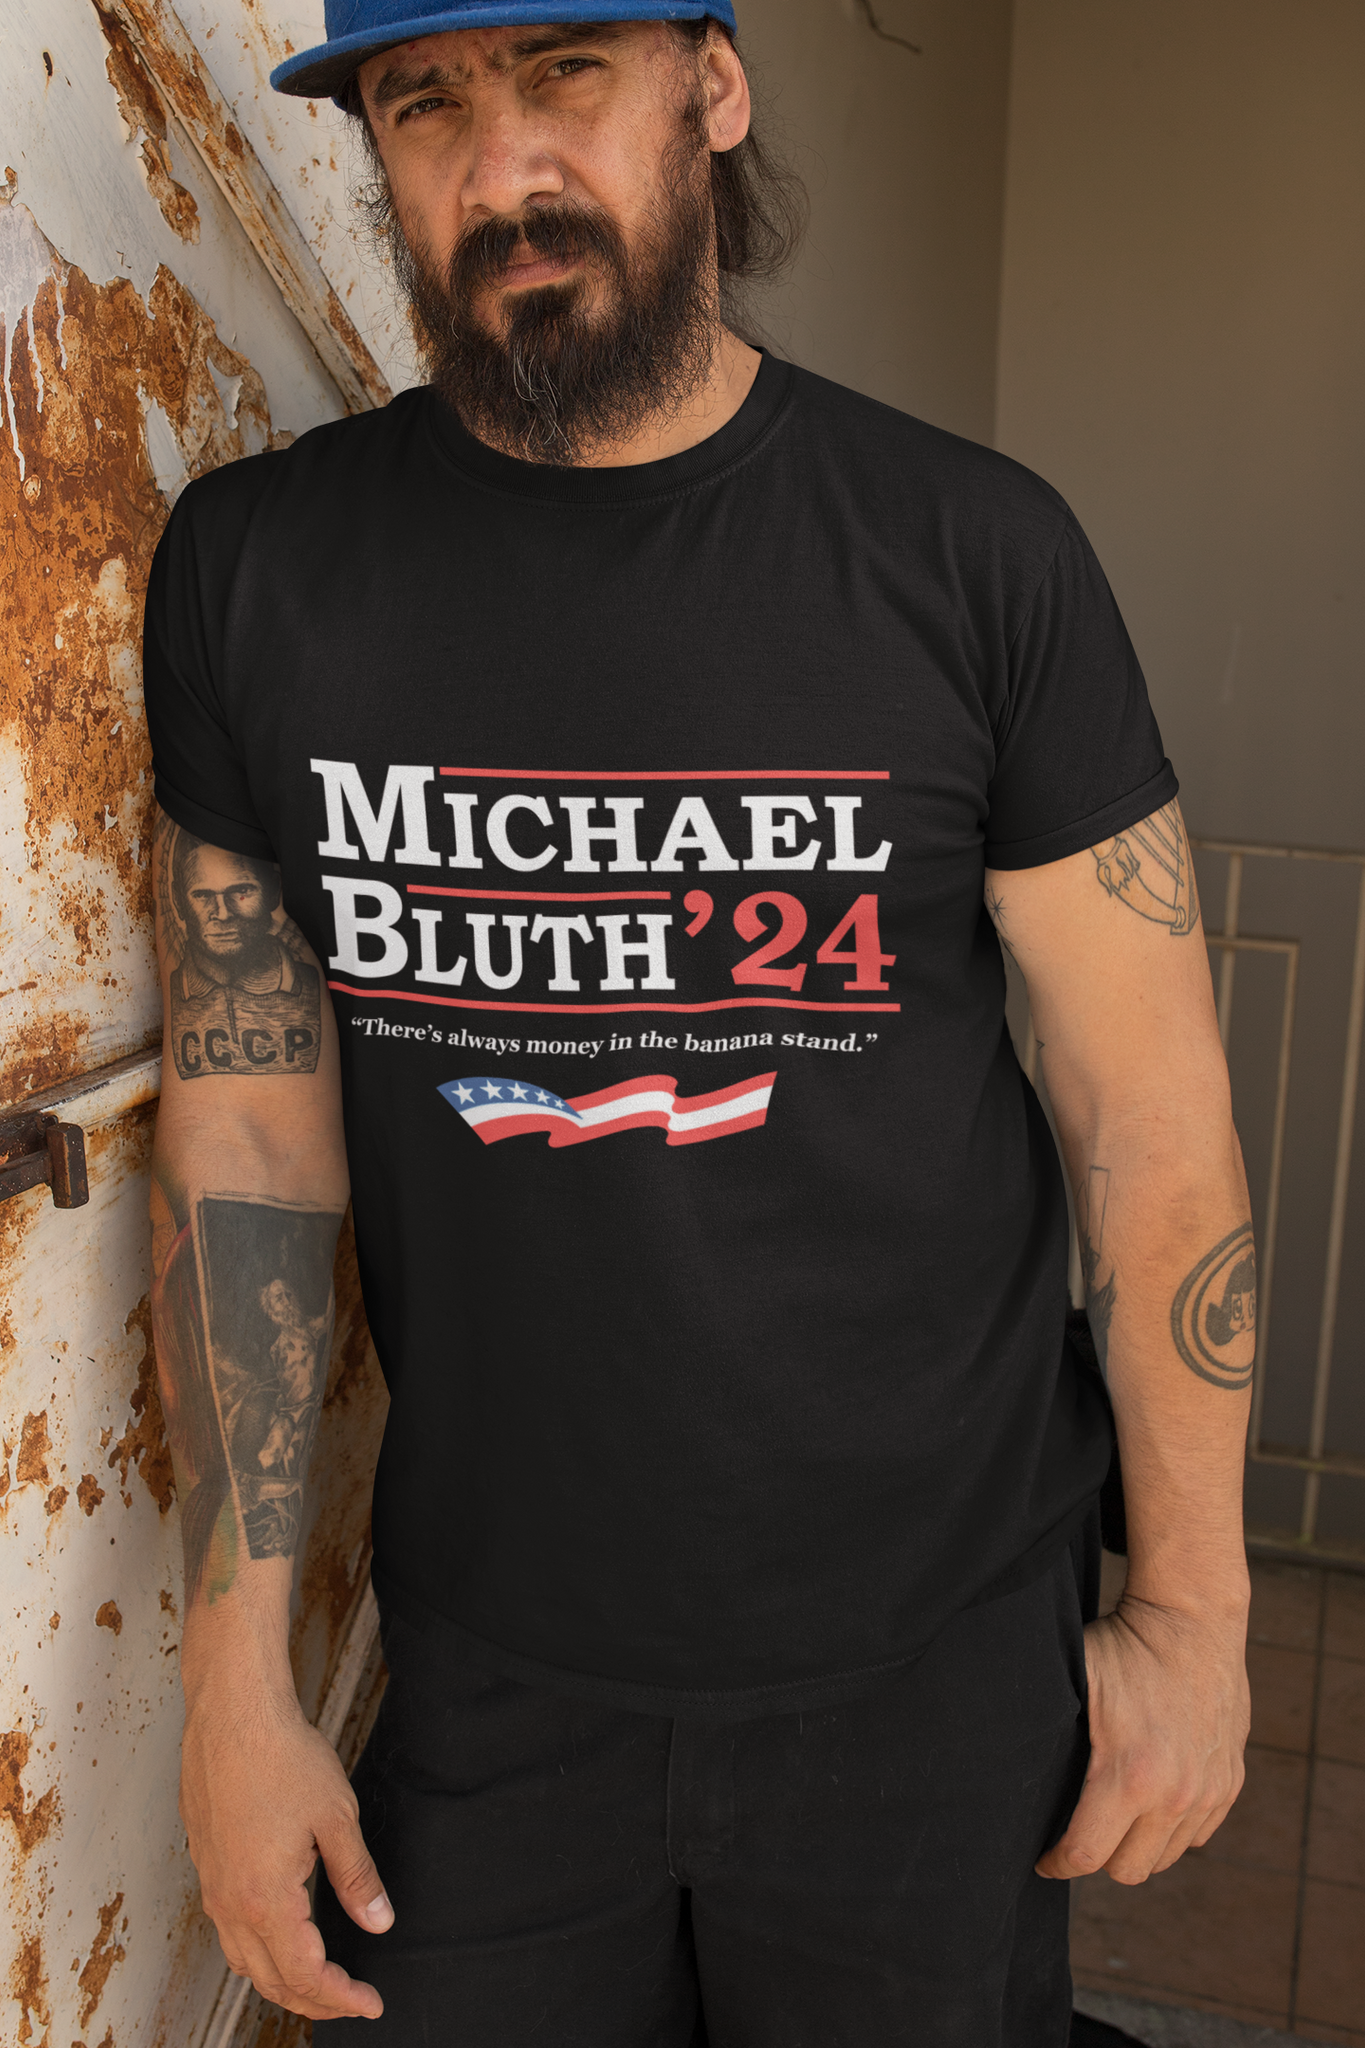 Arrested Development T Shirt, Michael Bluth 24 For President Tshirt, Theres Always Money In The Banana Stand Shirt